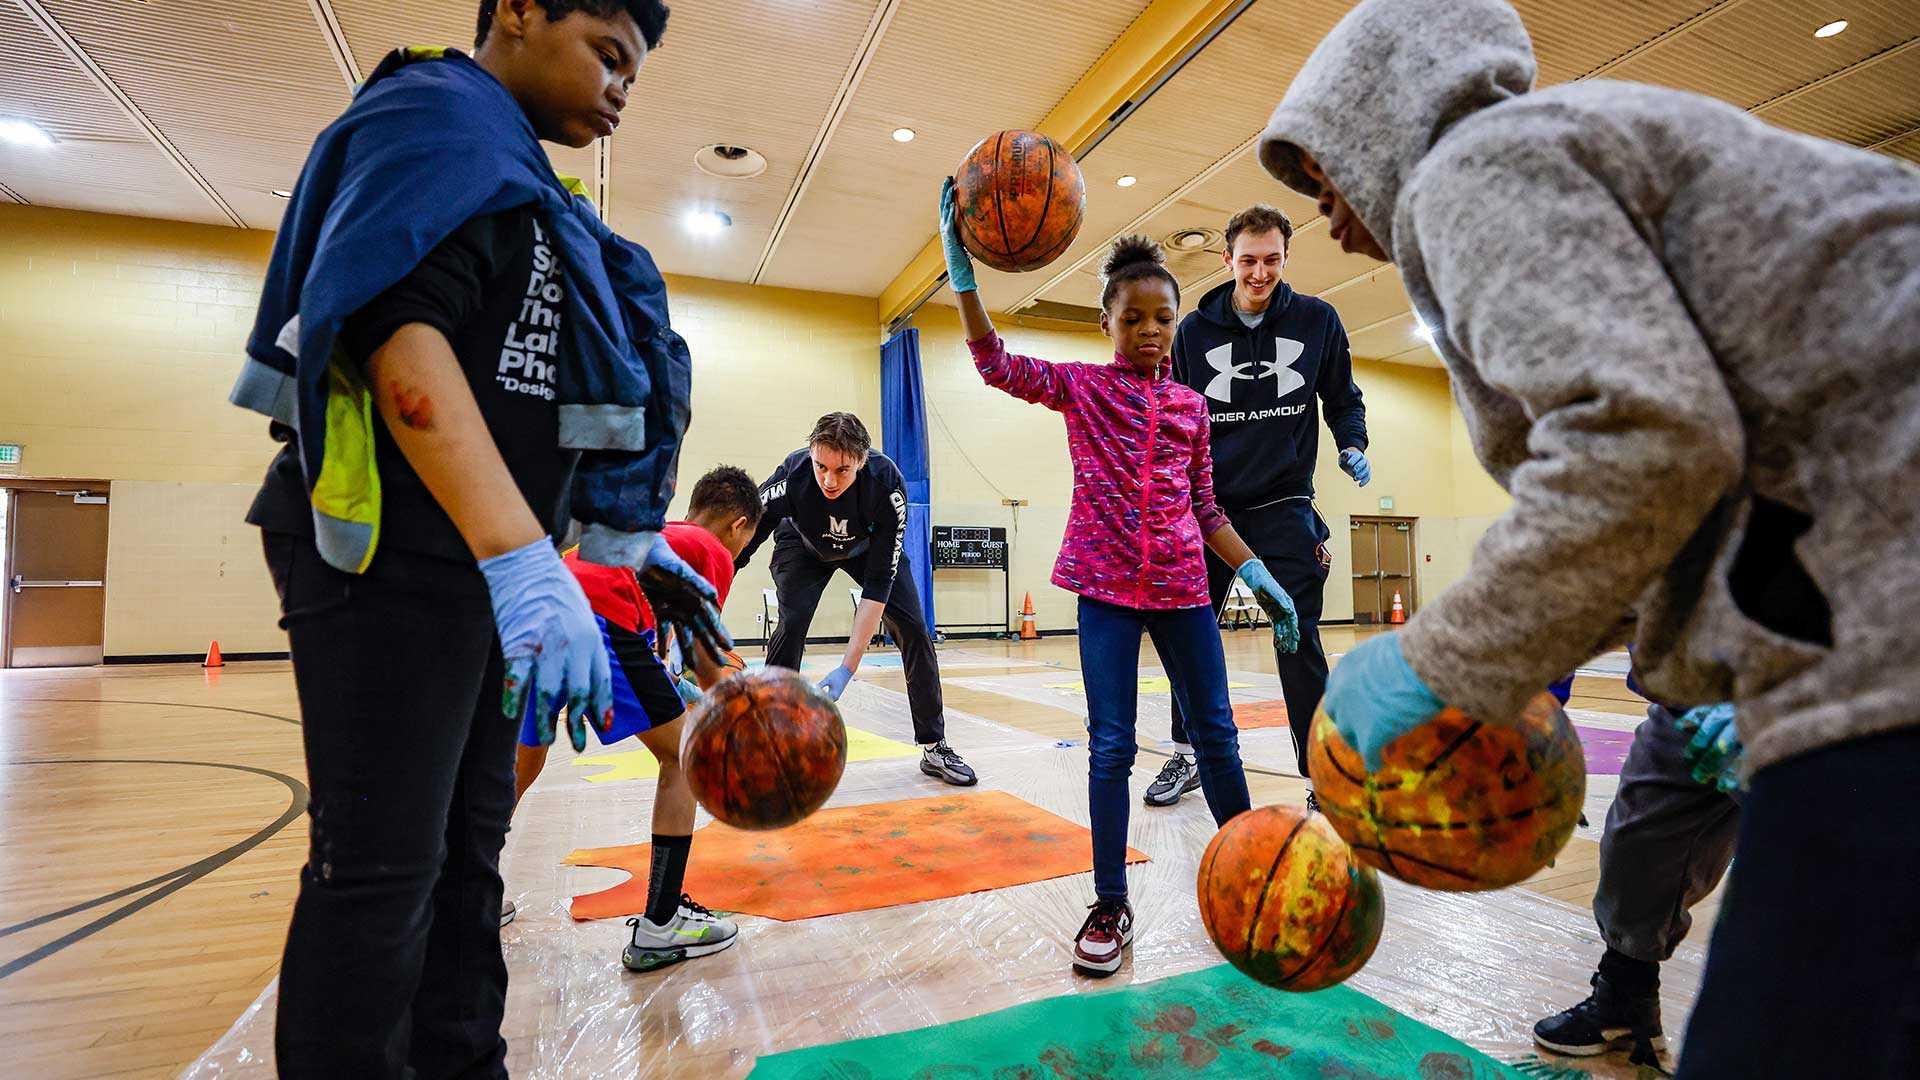 Basketball players and children bounce paint-smeared basketballs.